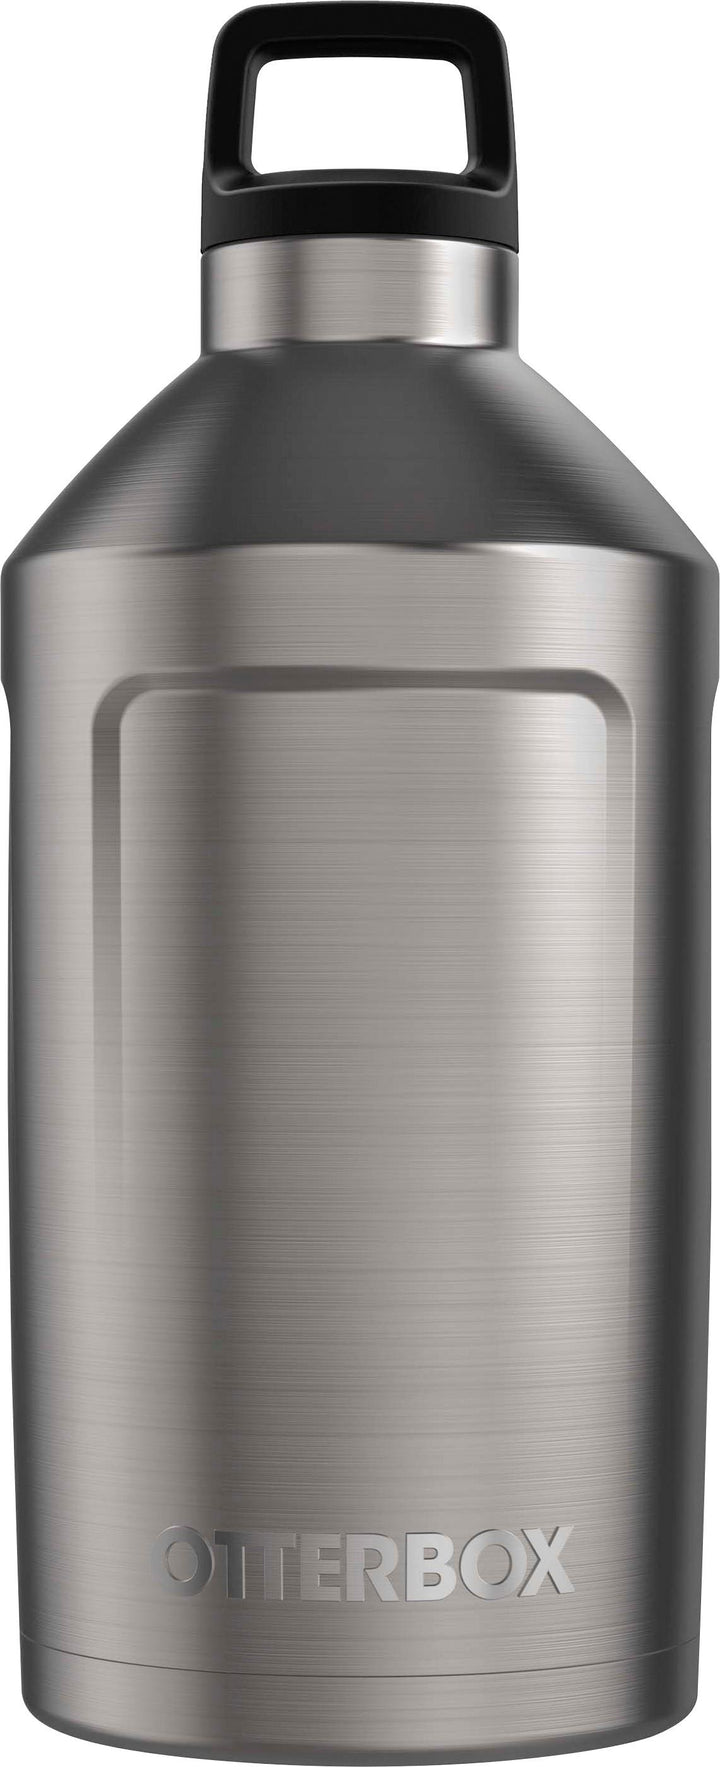 OtterBox - Elevation 64 Tumbler - Stainless Steel_2